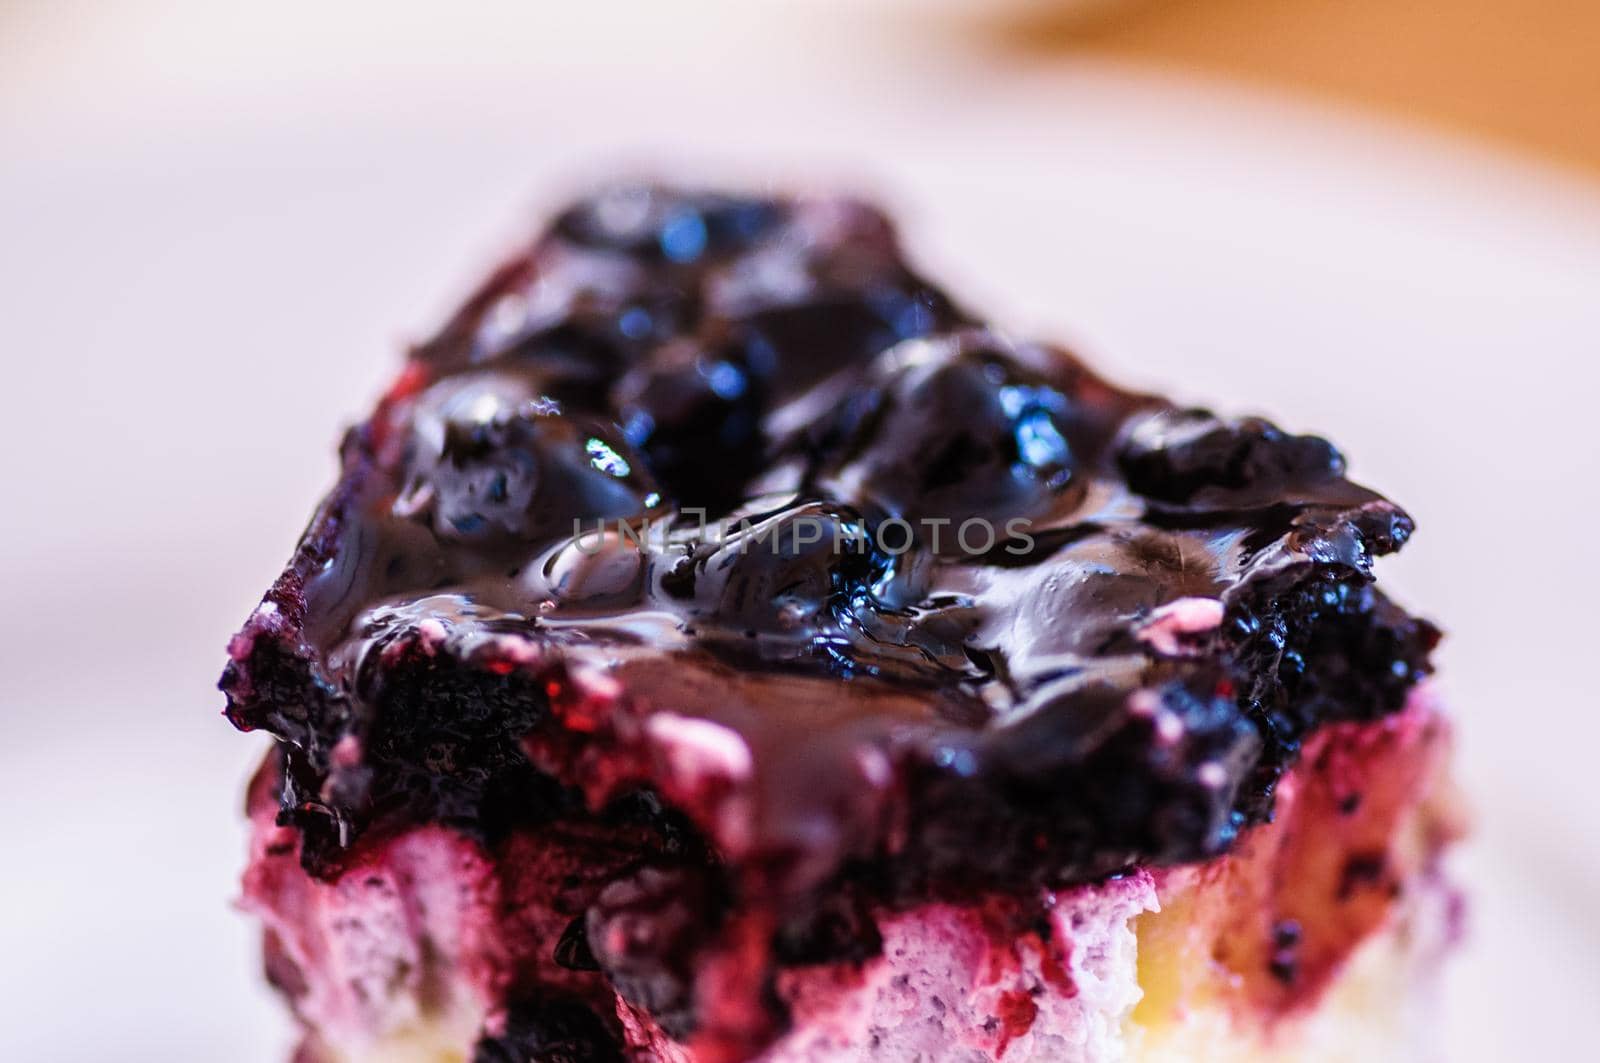 Blueberry pie with raspberries, food close up by shanserika